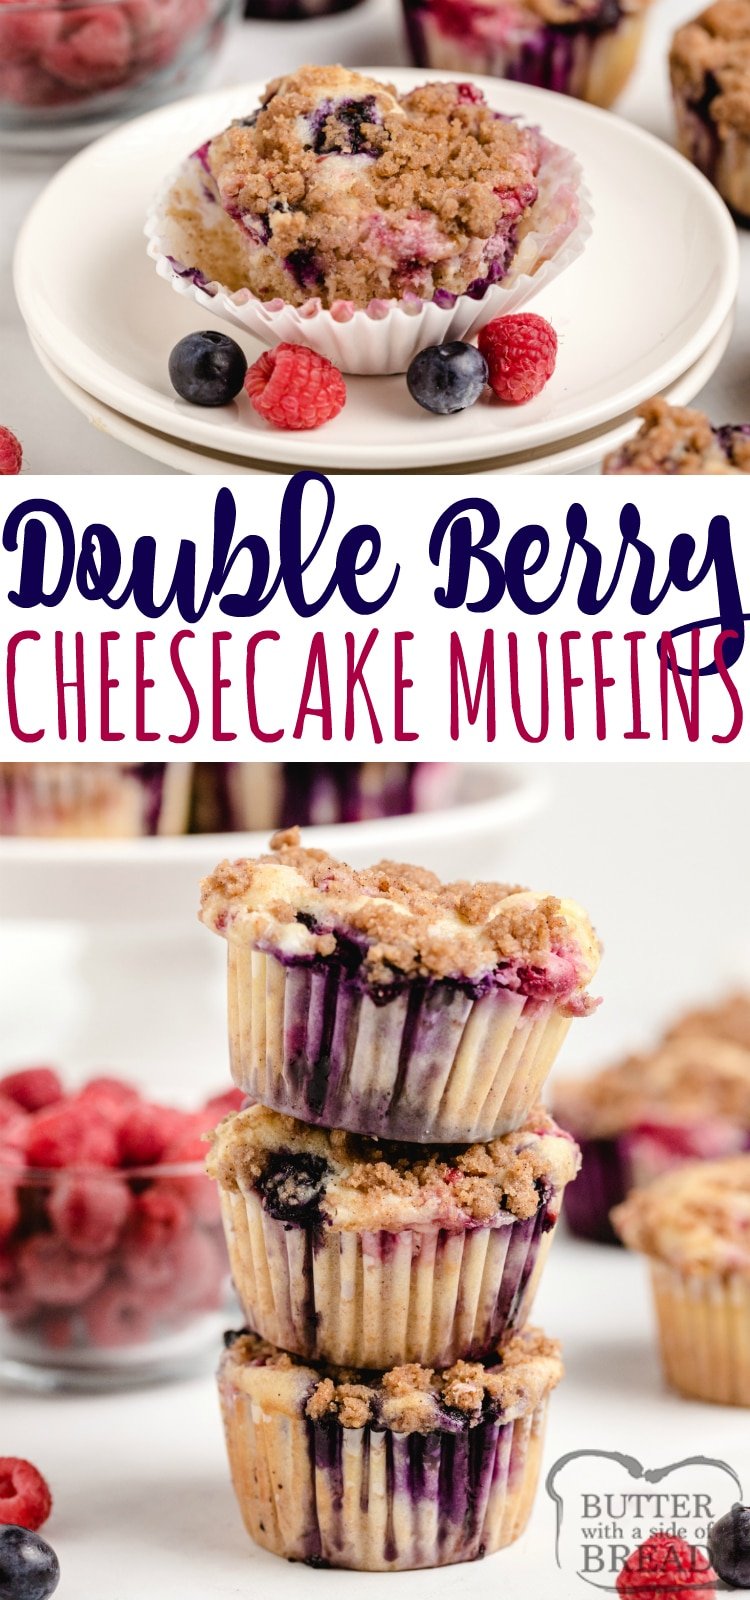 Double Berry Cheesecake Muffins are full of fresh blueberries and raspberries and have a delicious cream cheese filling in the middle! The brown sugar streusel topping adds even more flavor and a little bit of crunch too!